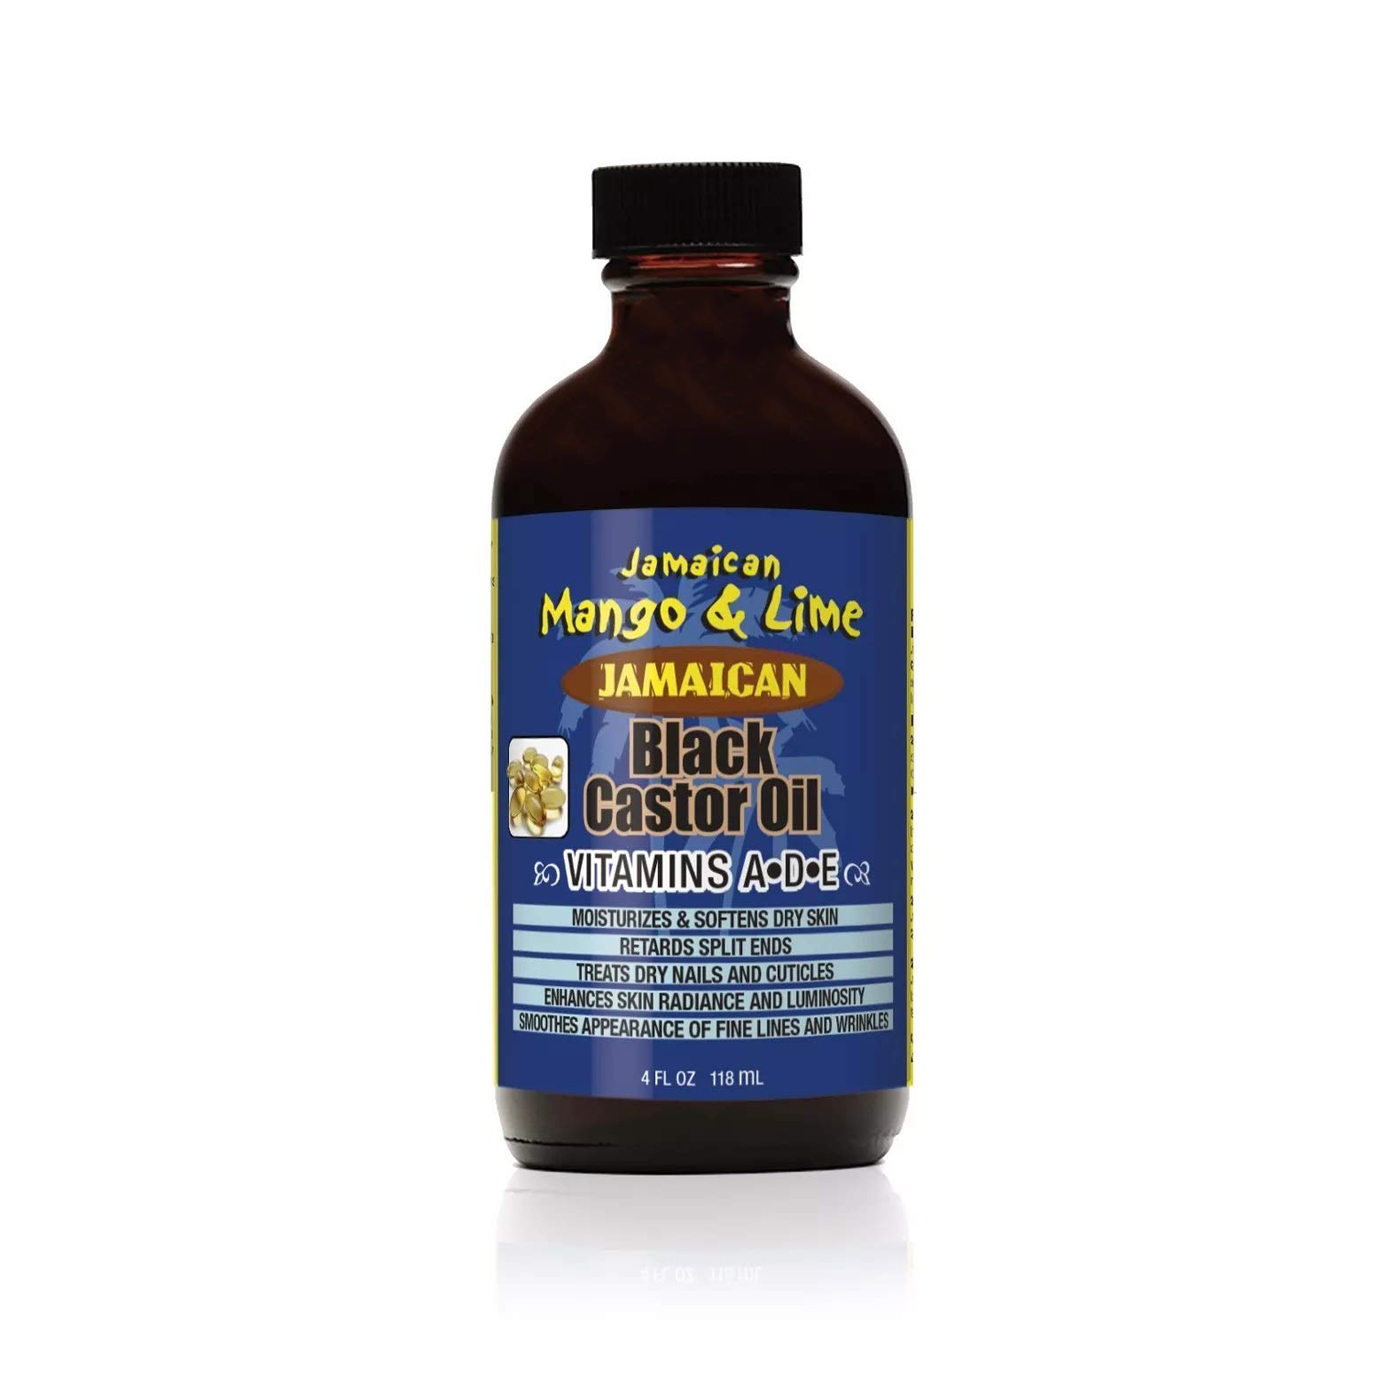 best Jamaican castor oil thats full of natural ingredients to help your beard grow thicker, Black castor oil Vitamins A-D-E